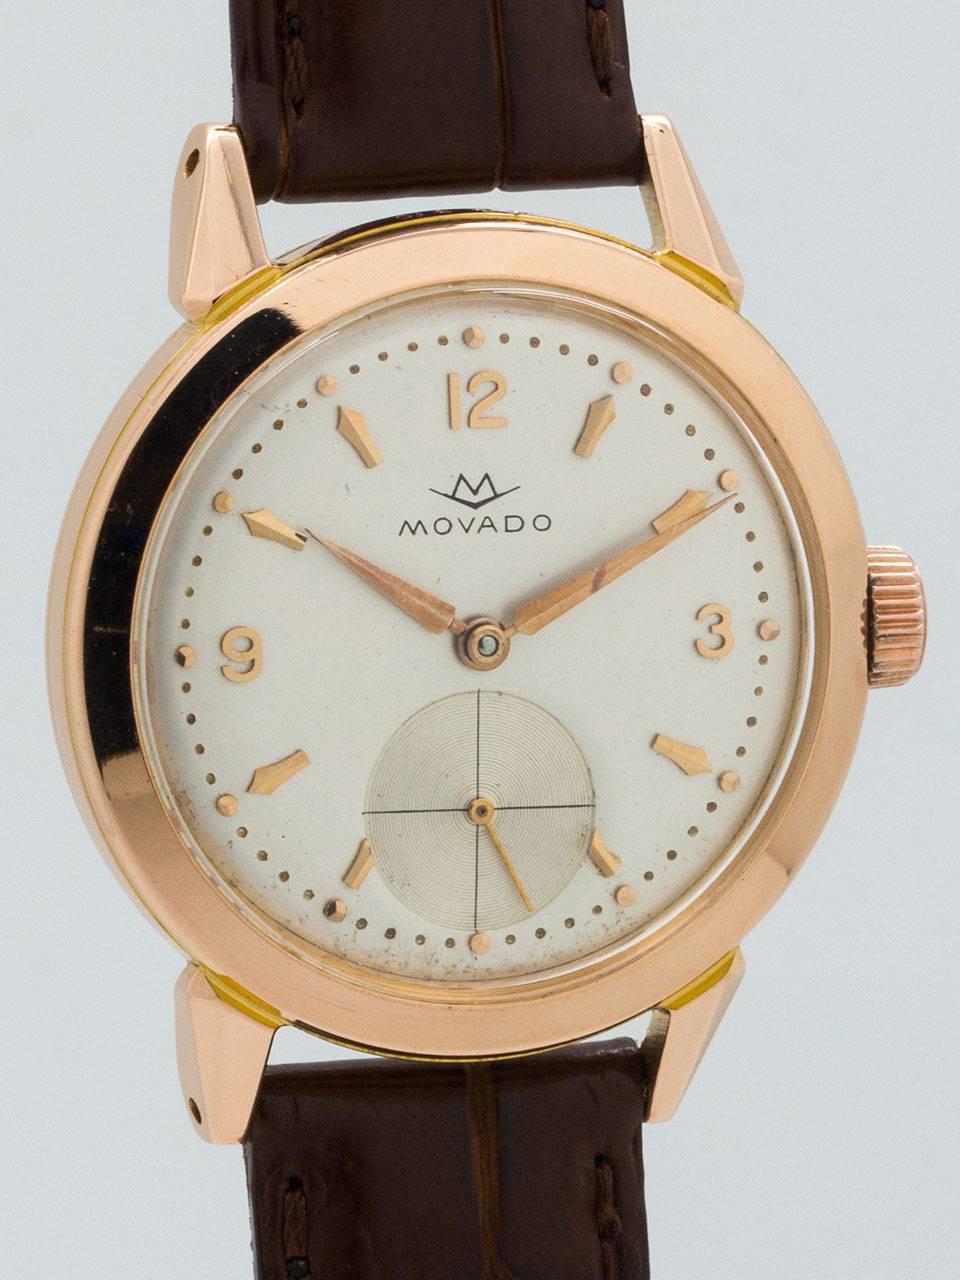 Movado 18K Rose Gold Dress Wristwatch circa 1950s. Featuring 34.5mm diameter case with wide bezel, extended horn lugs, and screw down water proof style case back. With acrylic crystal and original silvered satin dial with rose gold applied indexes,